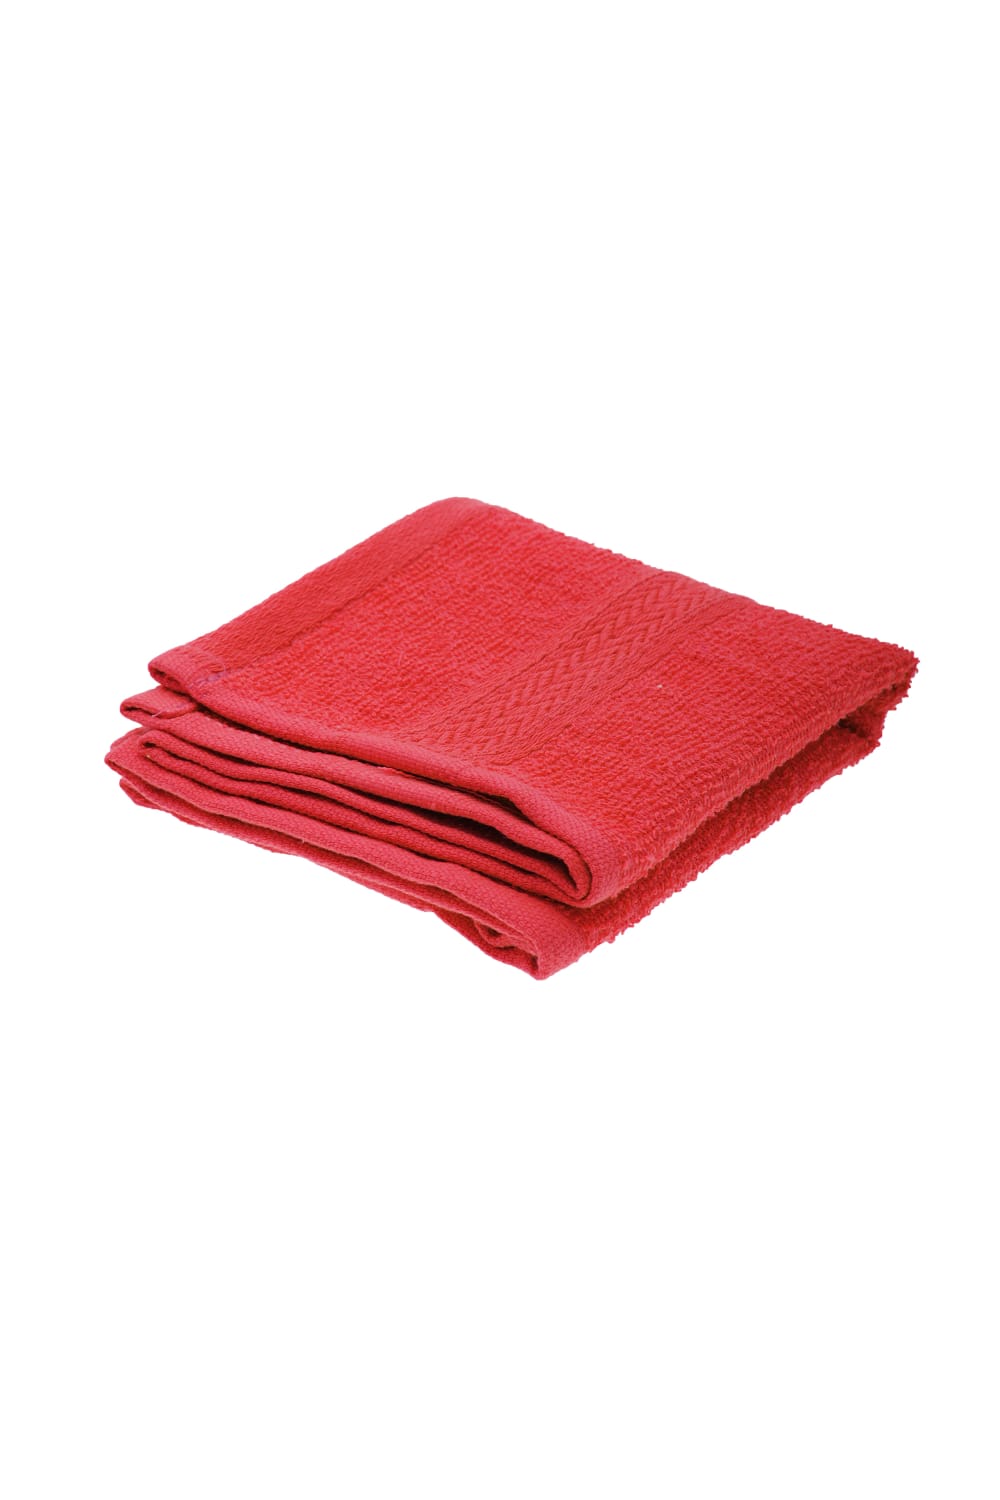 Jassz Plain Guest Hand Towel (350 GSM) (Pack of 2) (Red) (One Size)